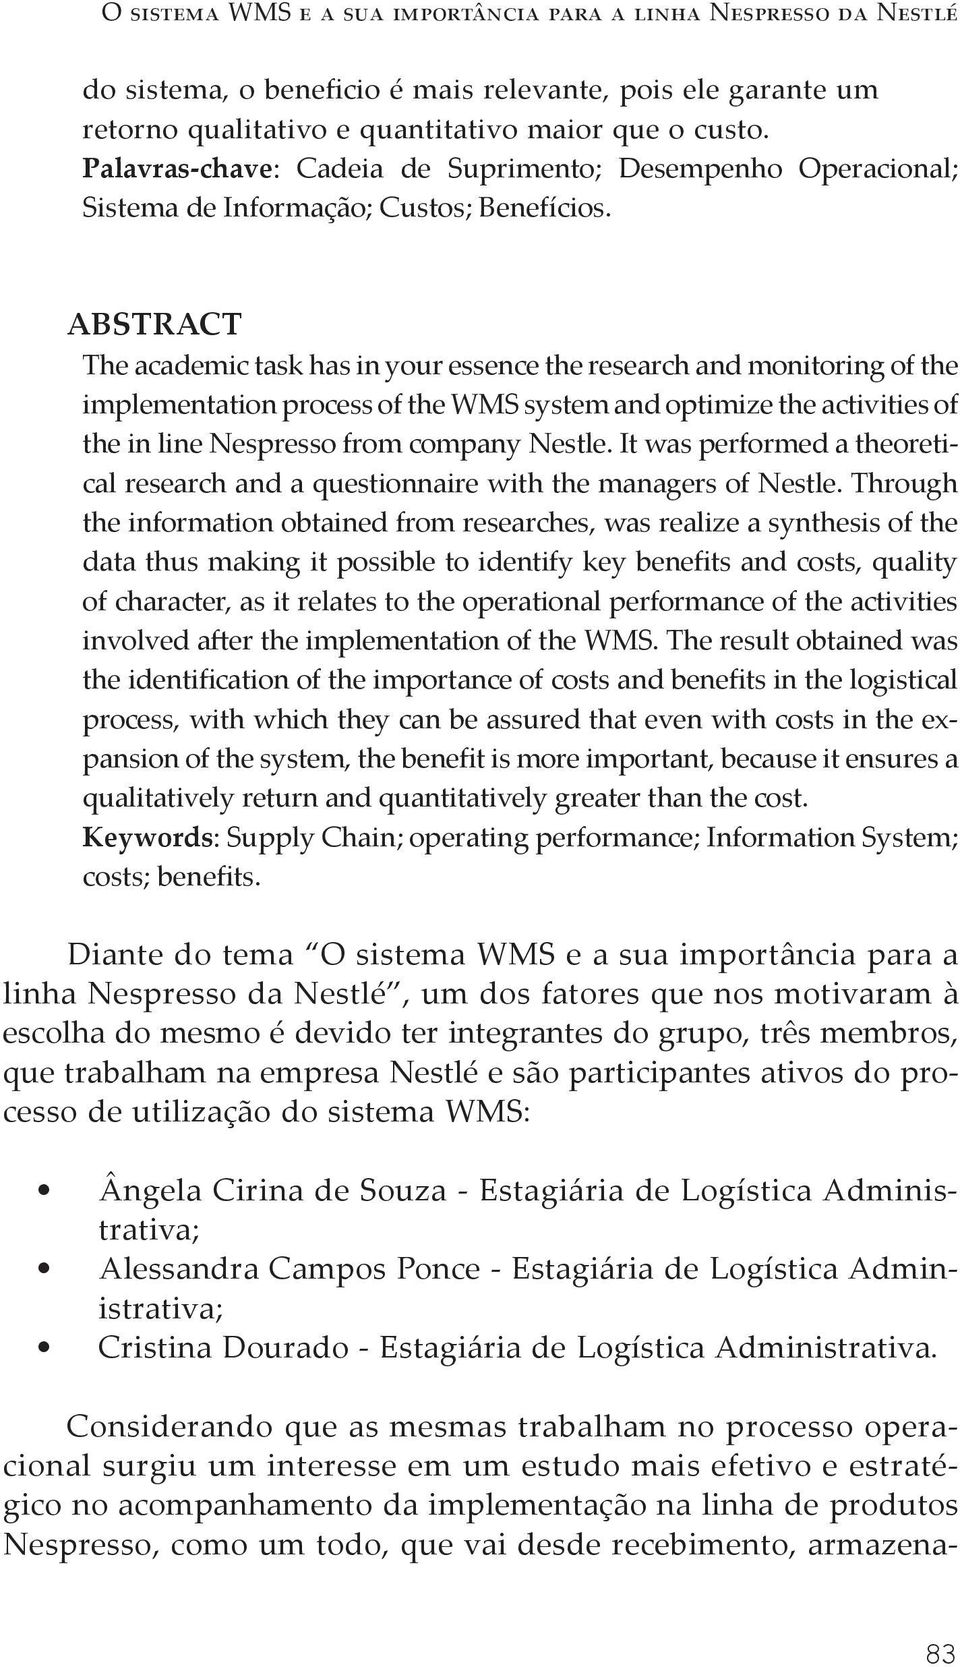 Abstract The academic task has in your essence the research and monitoring of the implementation process of the WMS system and optimize the activities of the in line Nespresso from company Nestle.